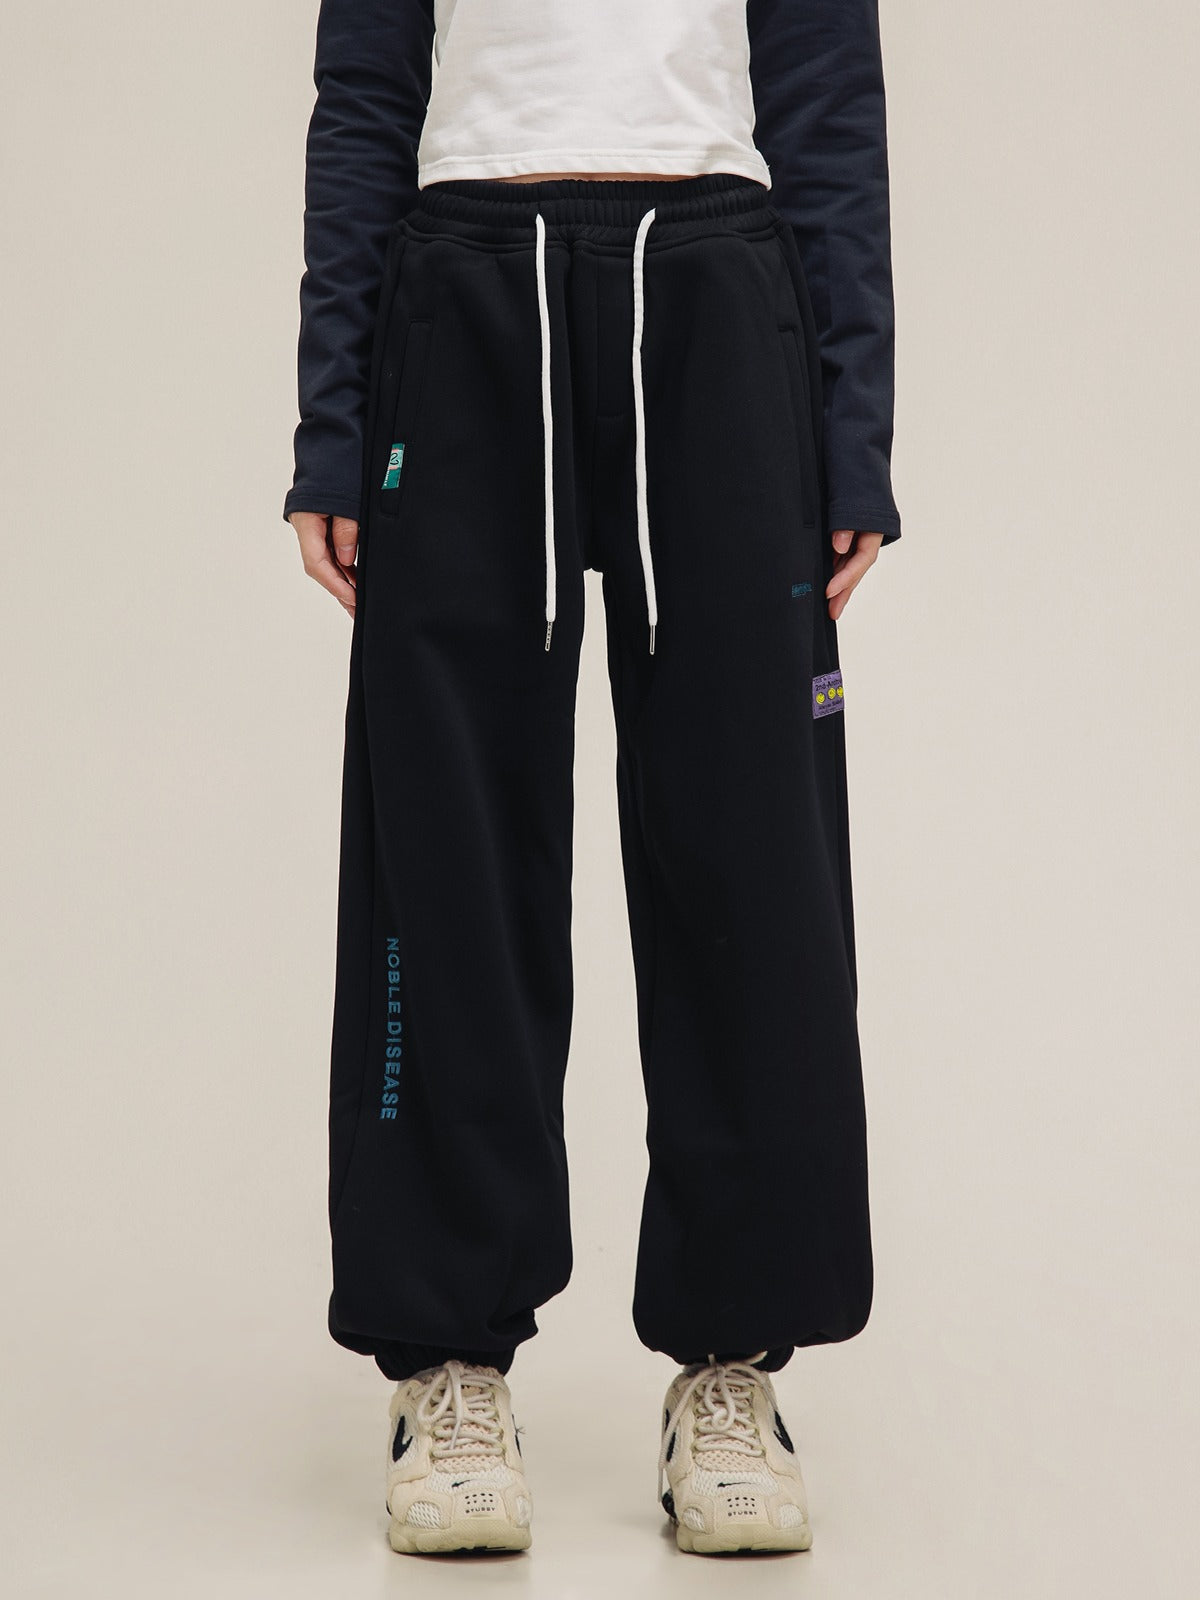 American label embroidered sweat pants